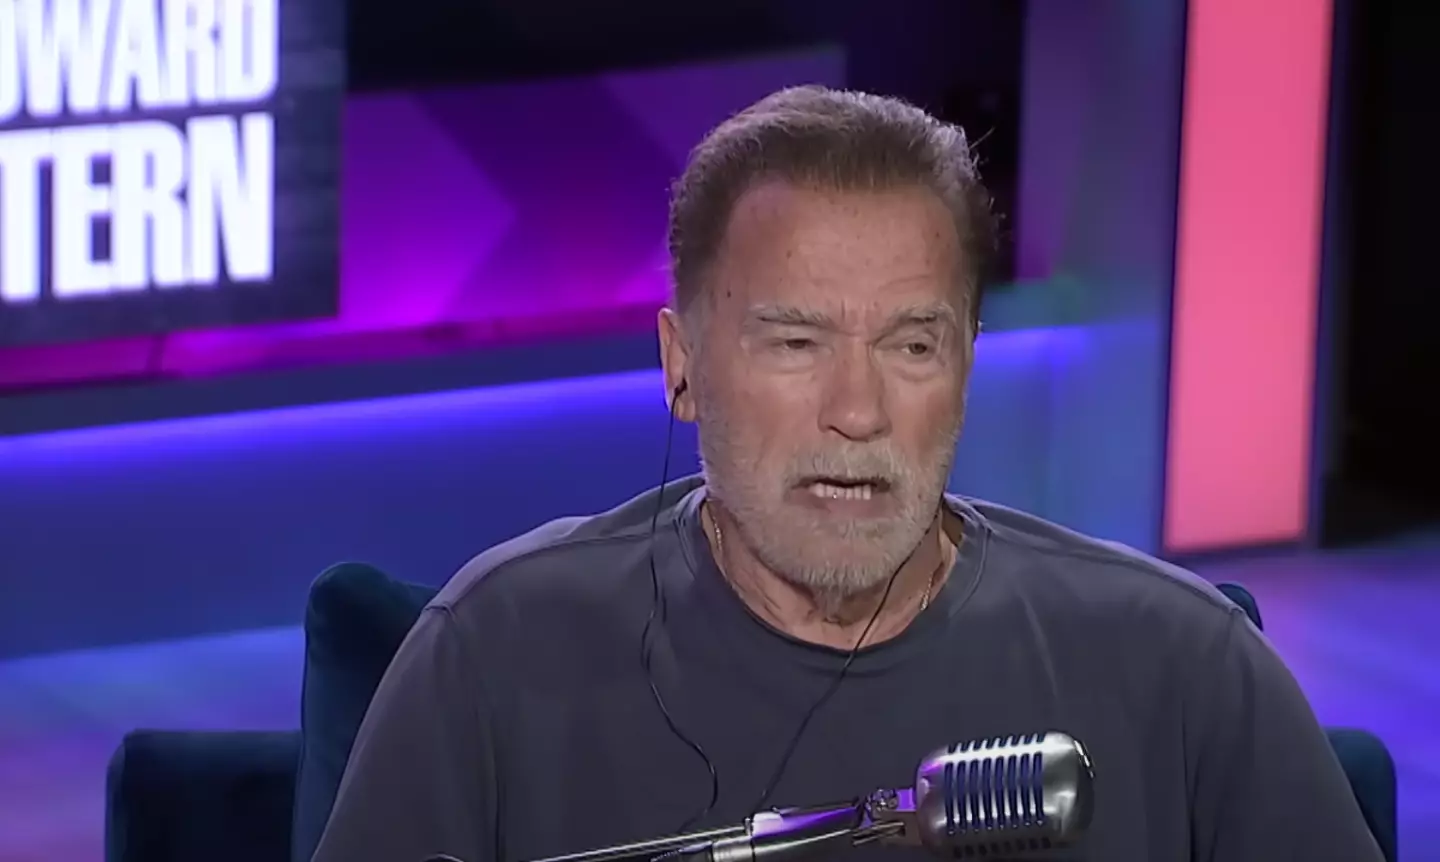 Schwarzenegger has found it difficult to accept the changes his body has gone through as he ages.